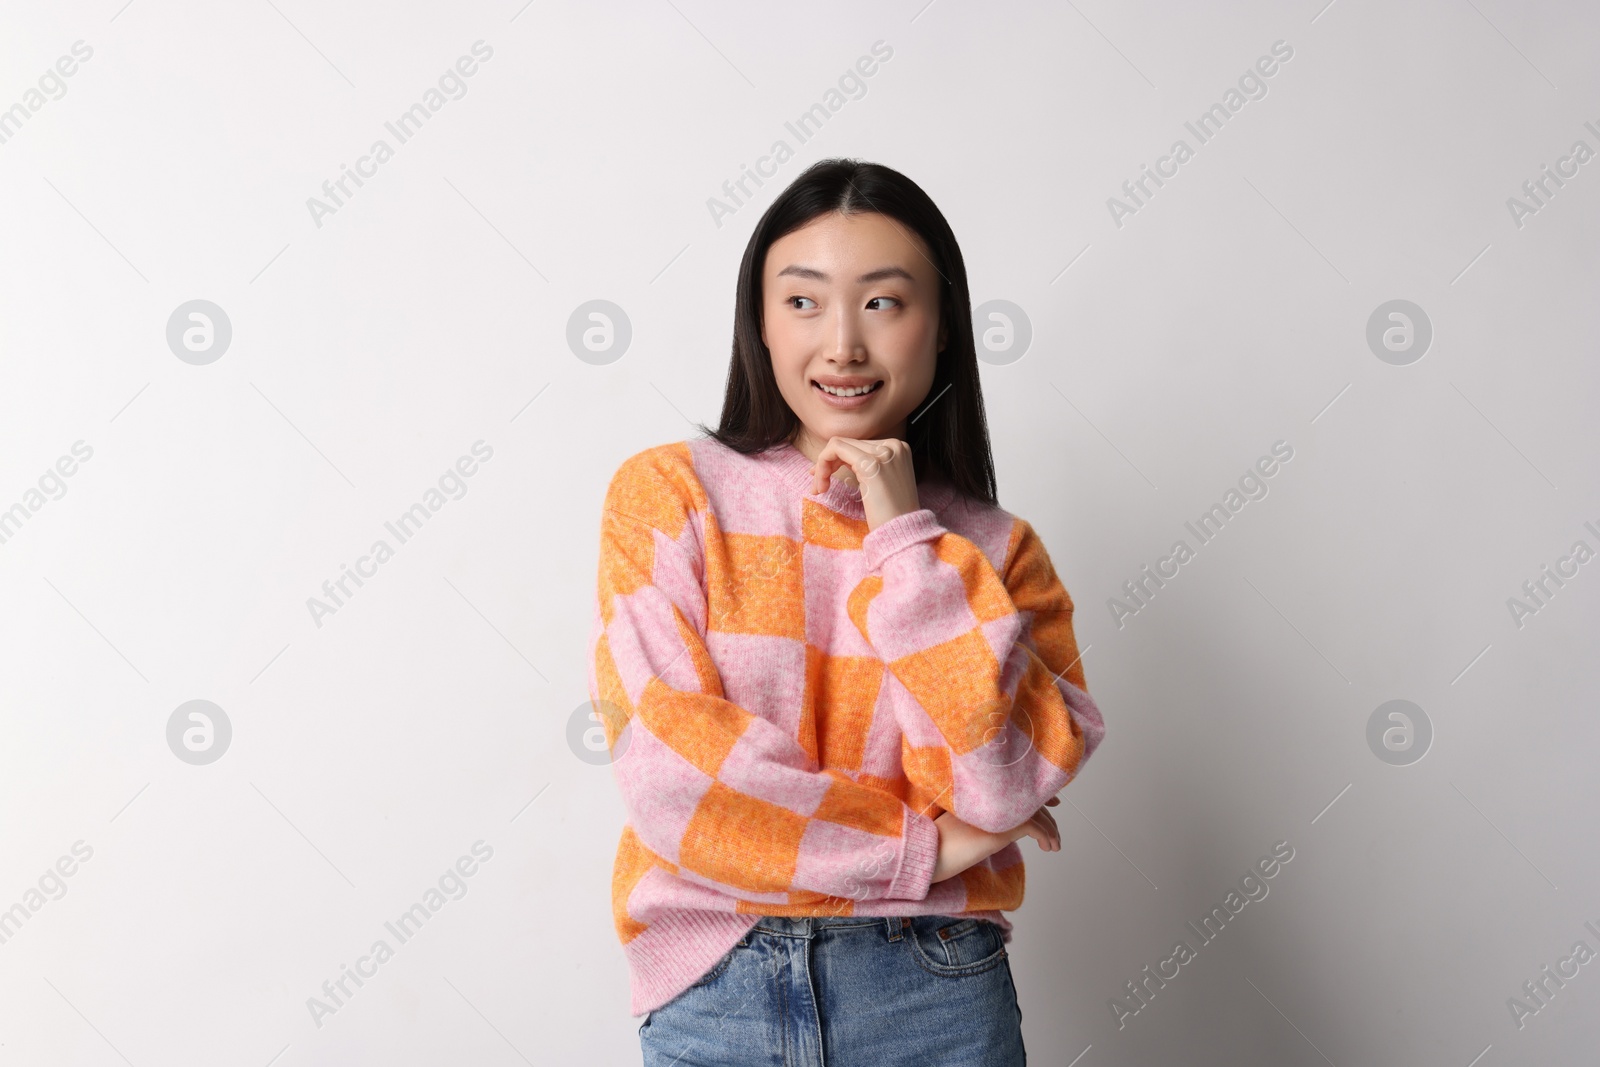 Photo of Portrait of smiling woman on light background